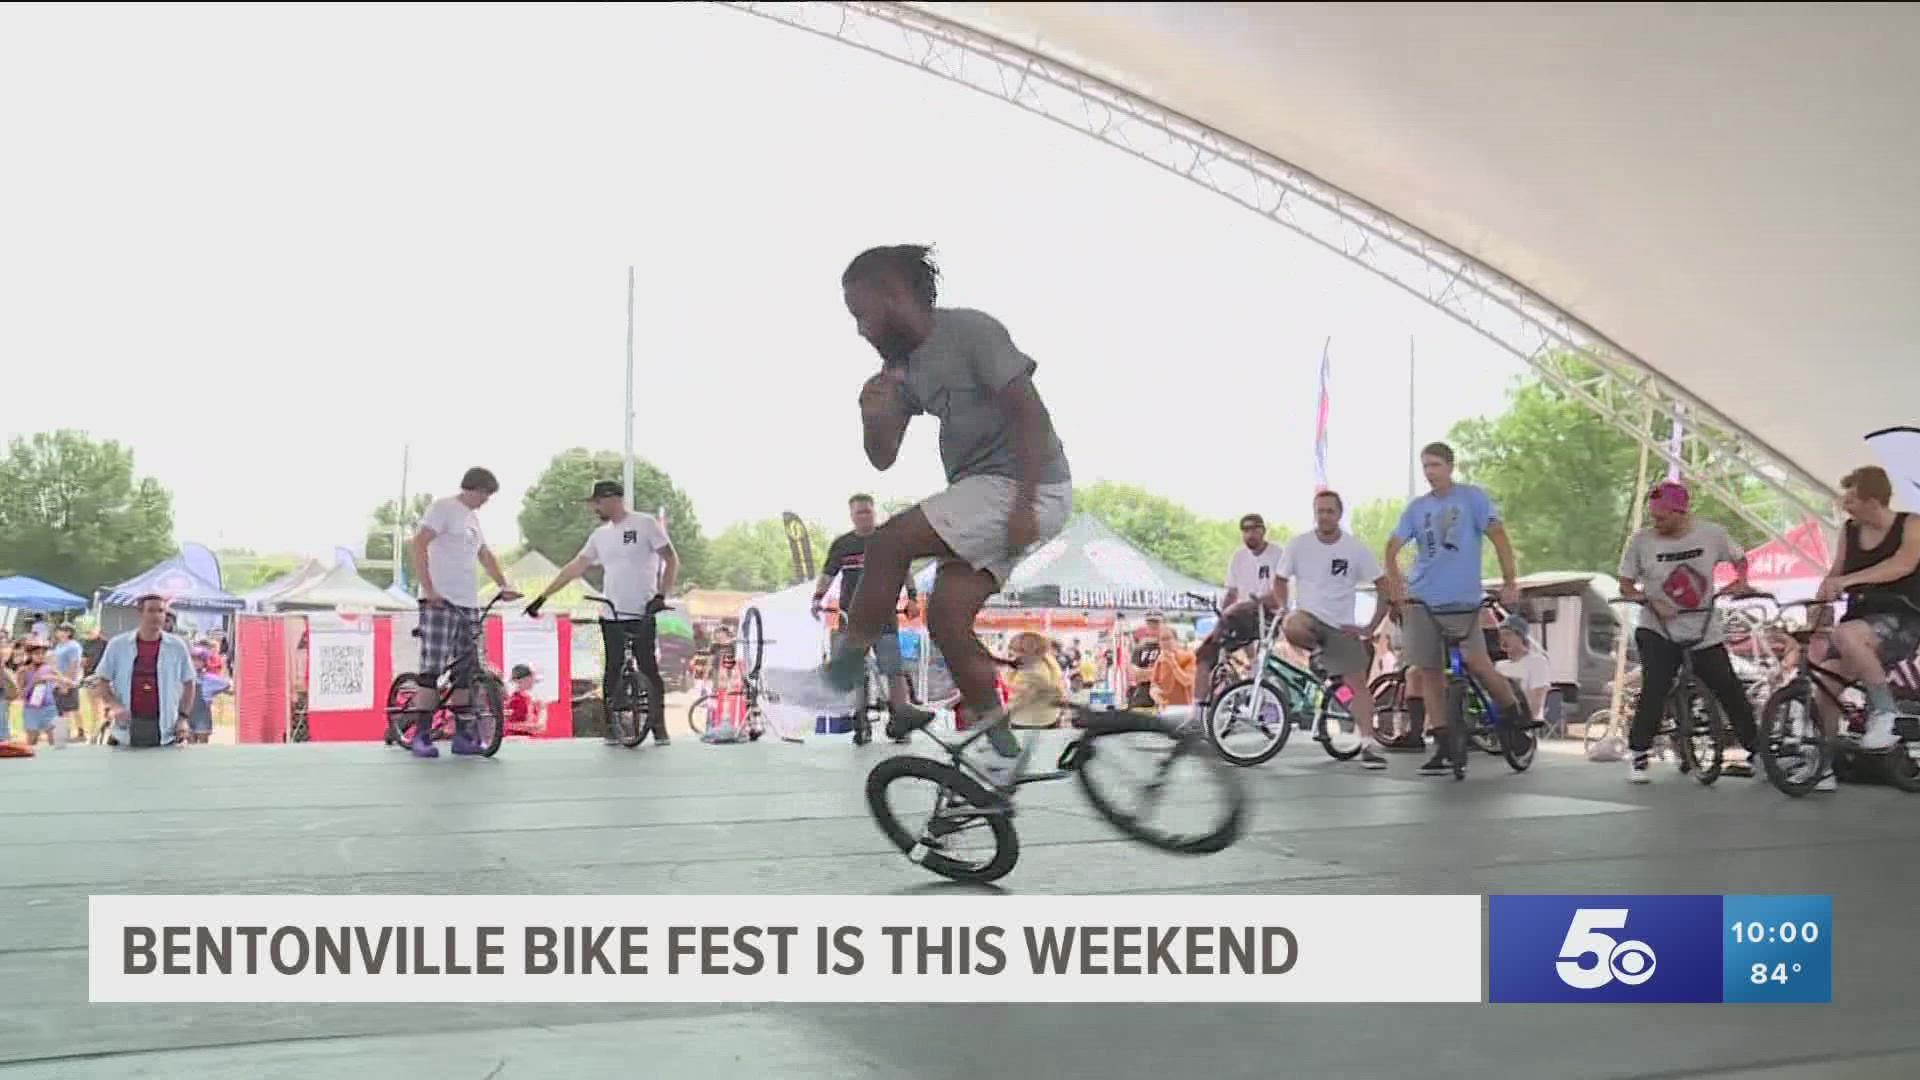 The 2nd annual Bike Fest, a three-day event that celebrates cycling culture in Northwest Arkansas, kicked off in Bentonville.